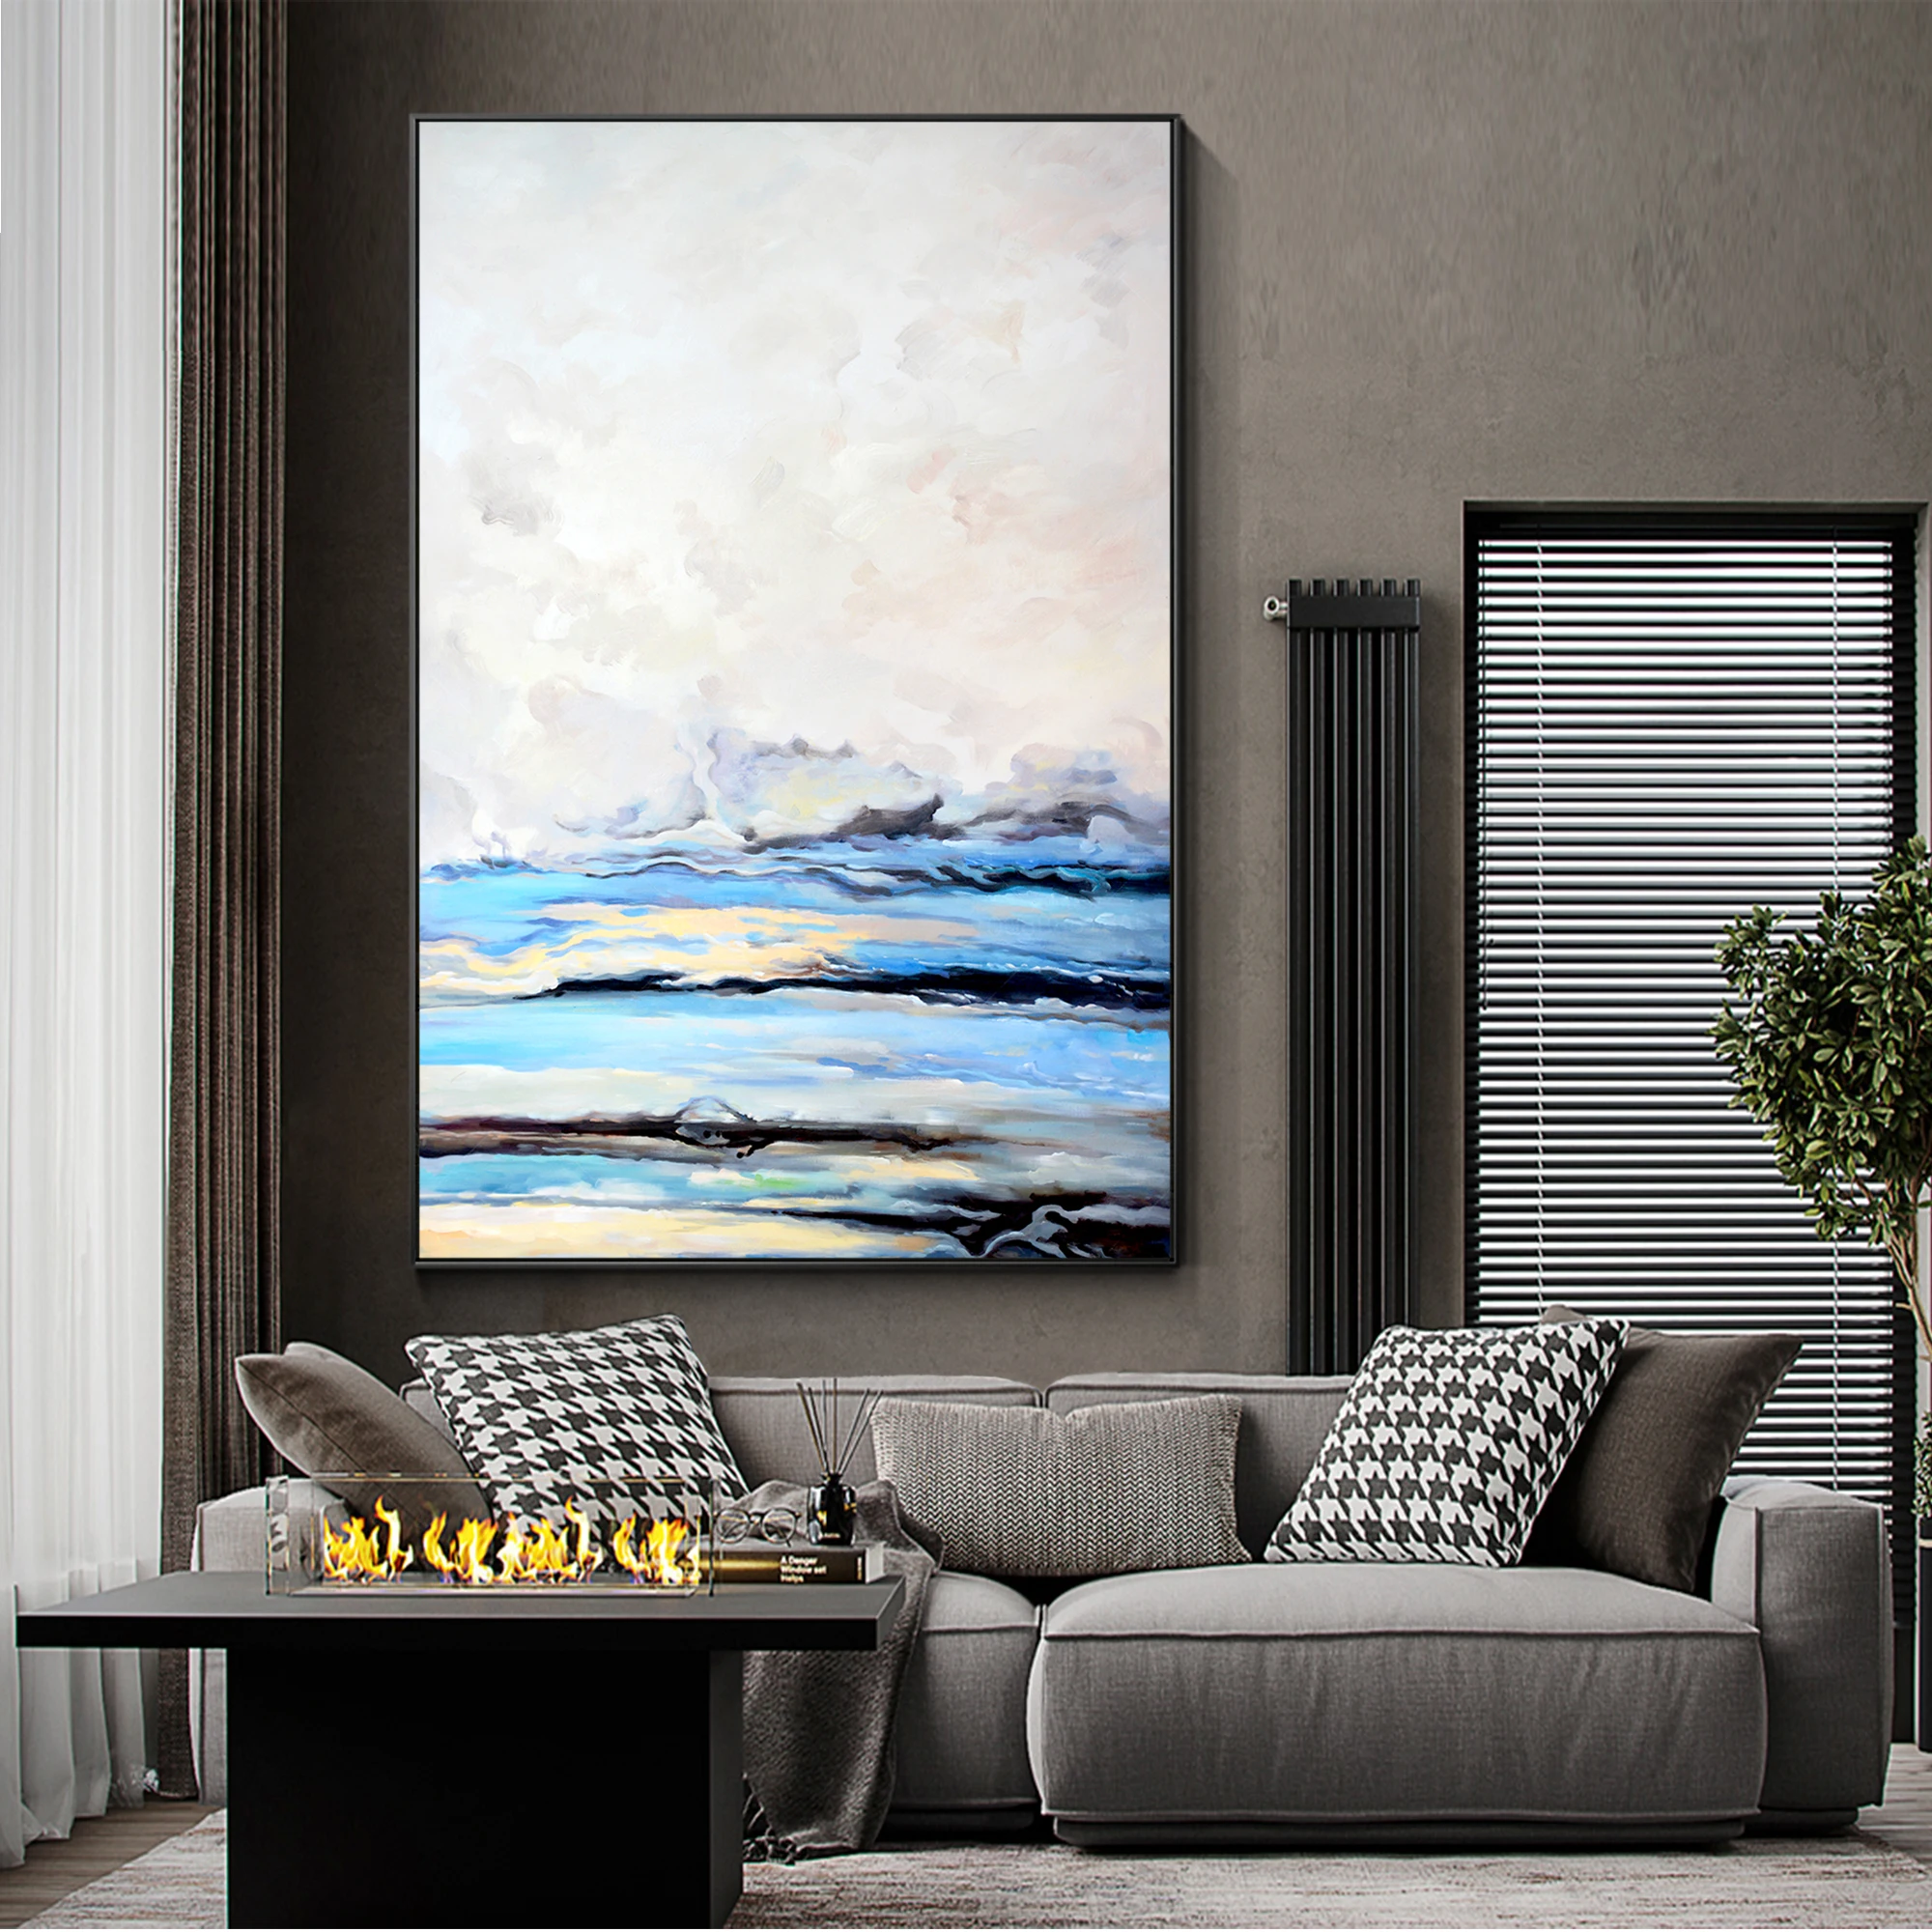 

Sky Blue White Cloud Abstract Original Painting on Canvas, Landscape Painting, Livingroom Bedroom Lounge Modern Framed Wall Art